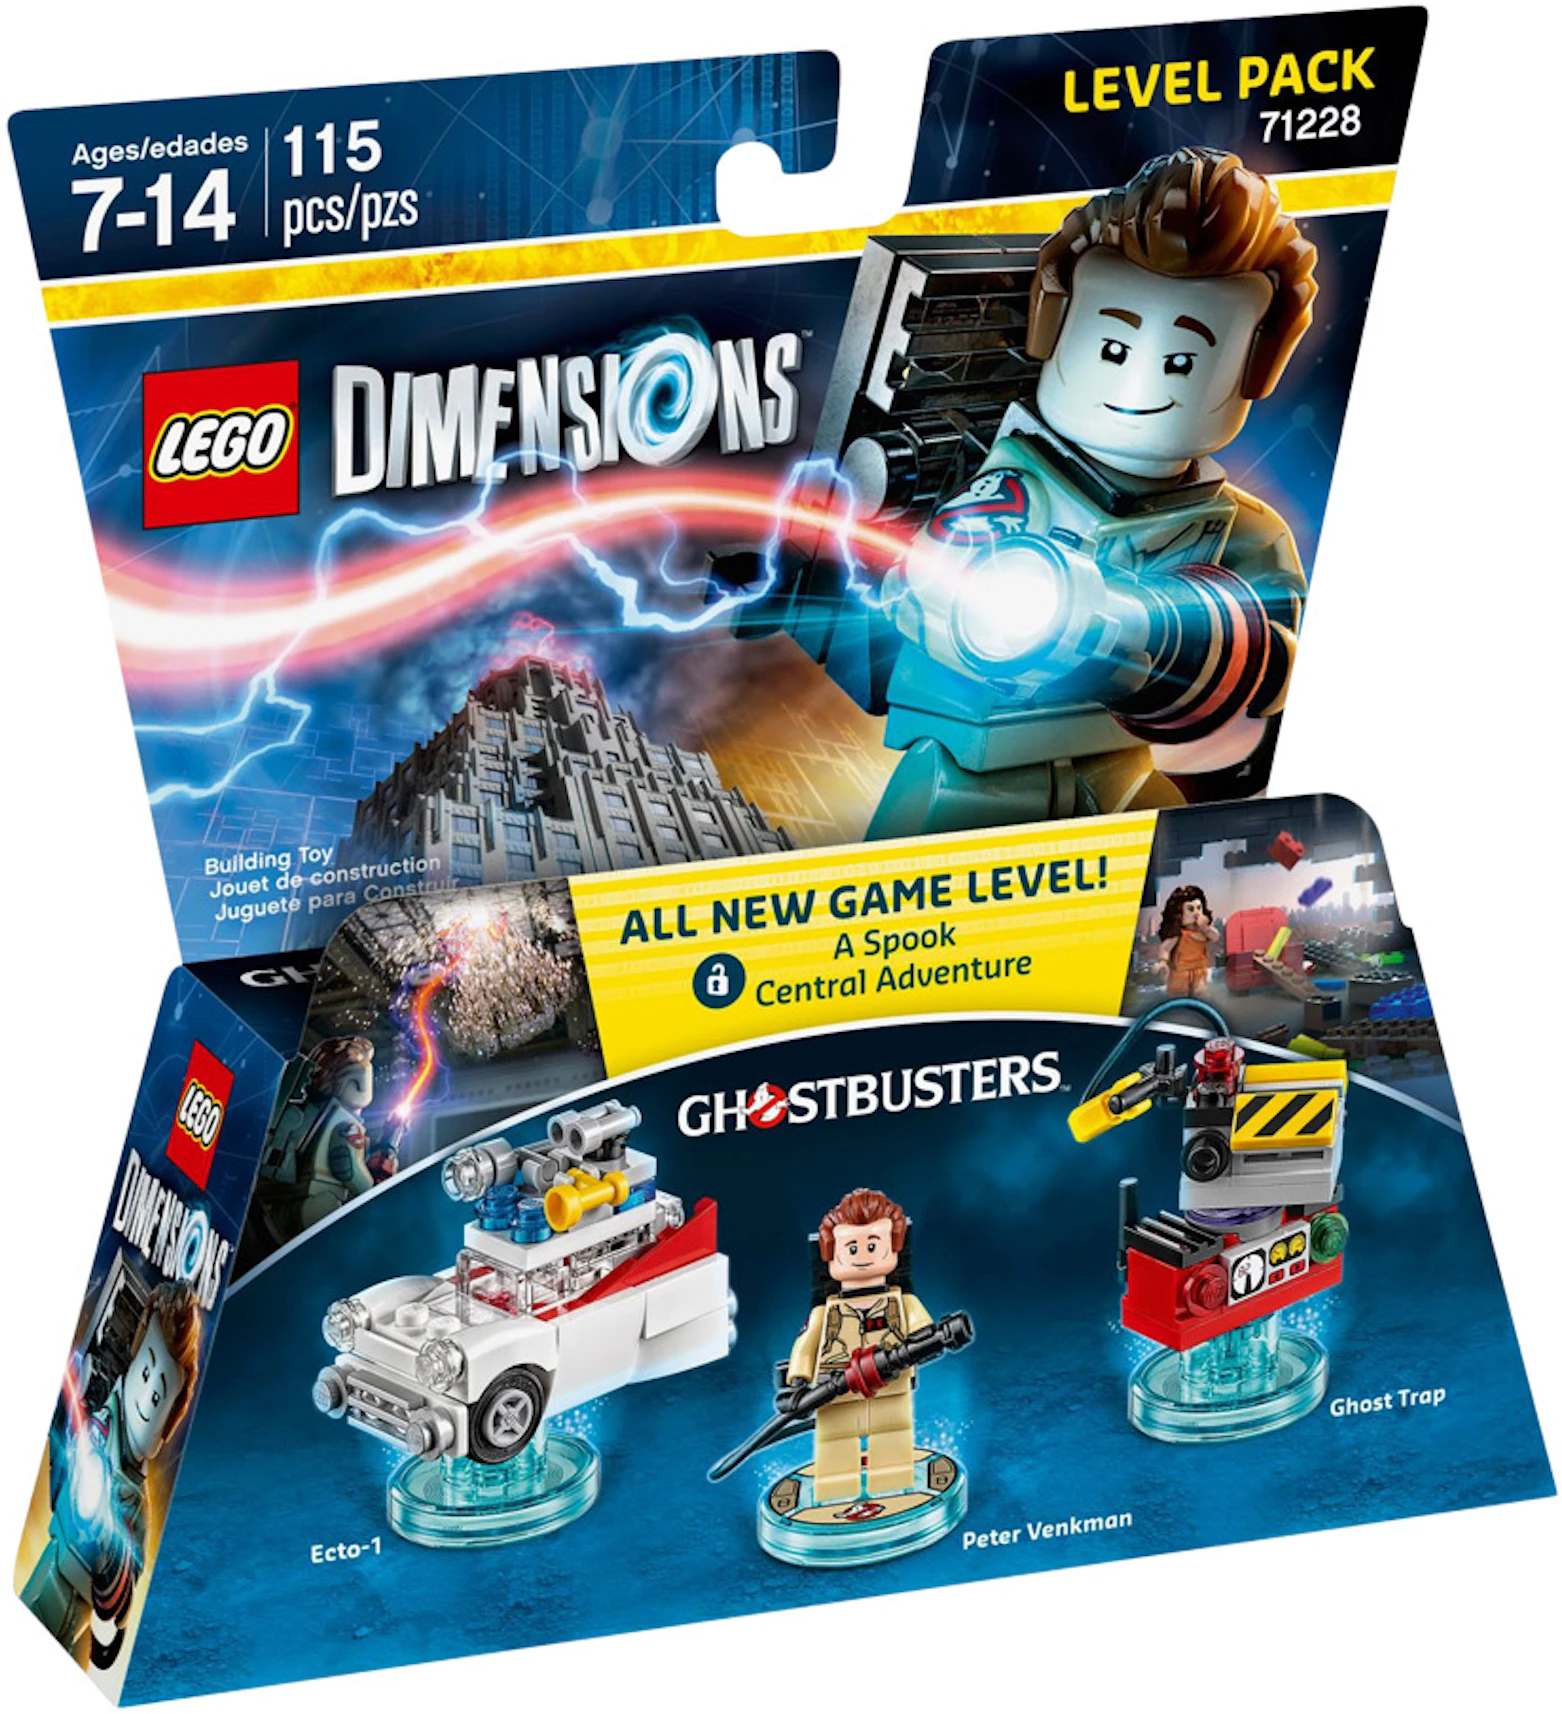 Jumping jack wazig oog LEGO Dimensions Ghostbusters Level Pack Set 71228 - SS16 - US